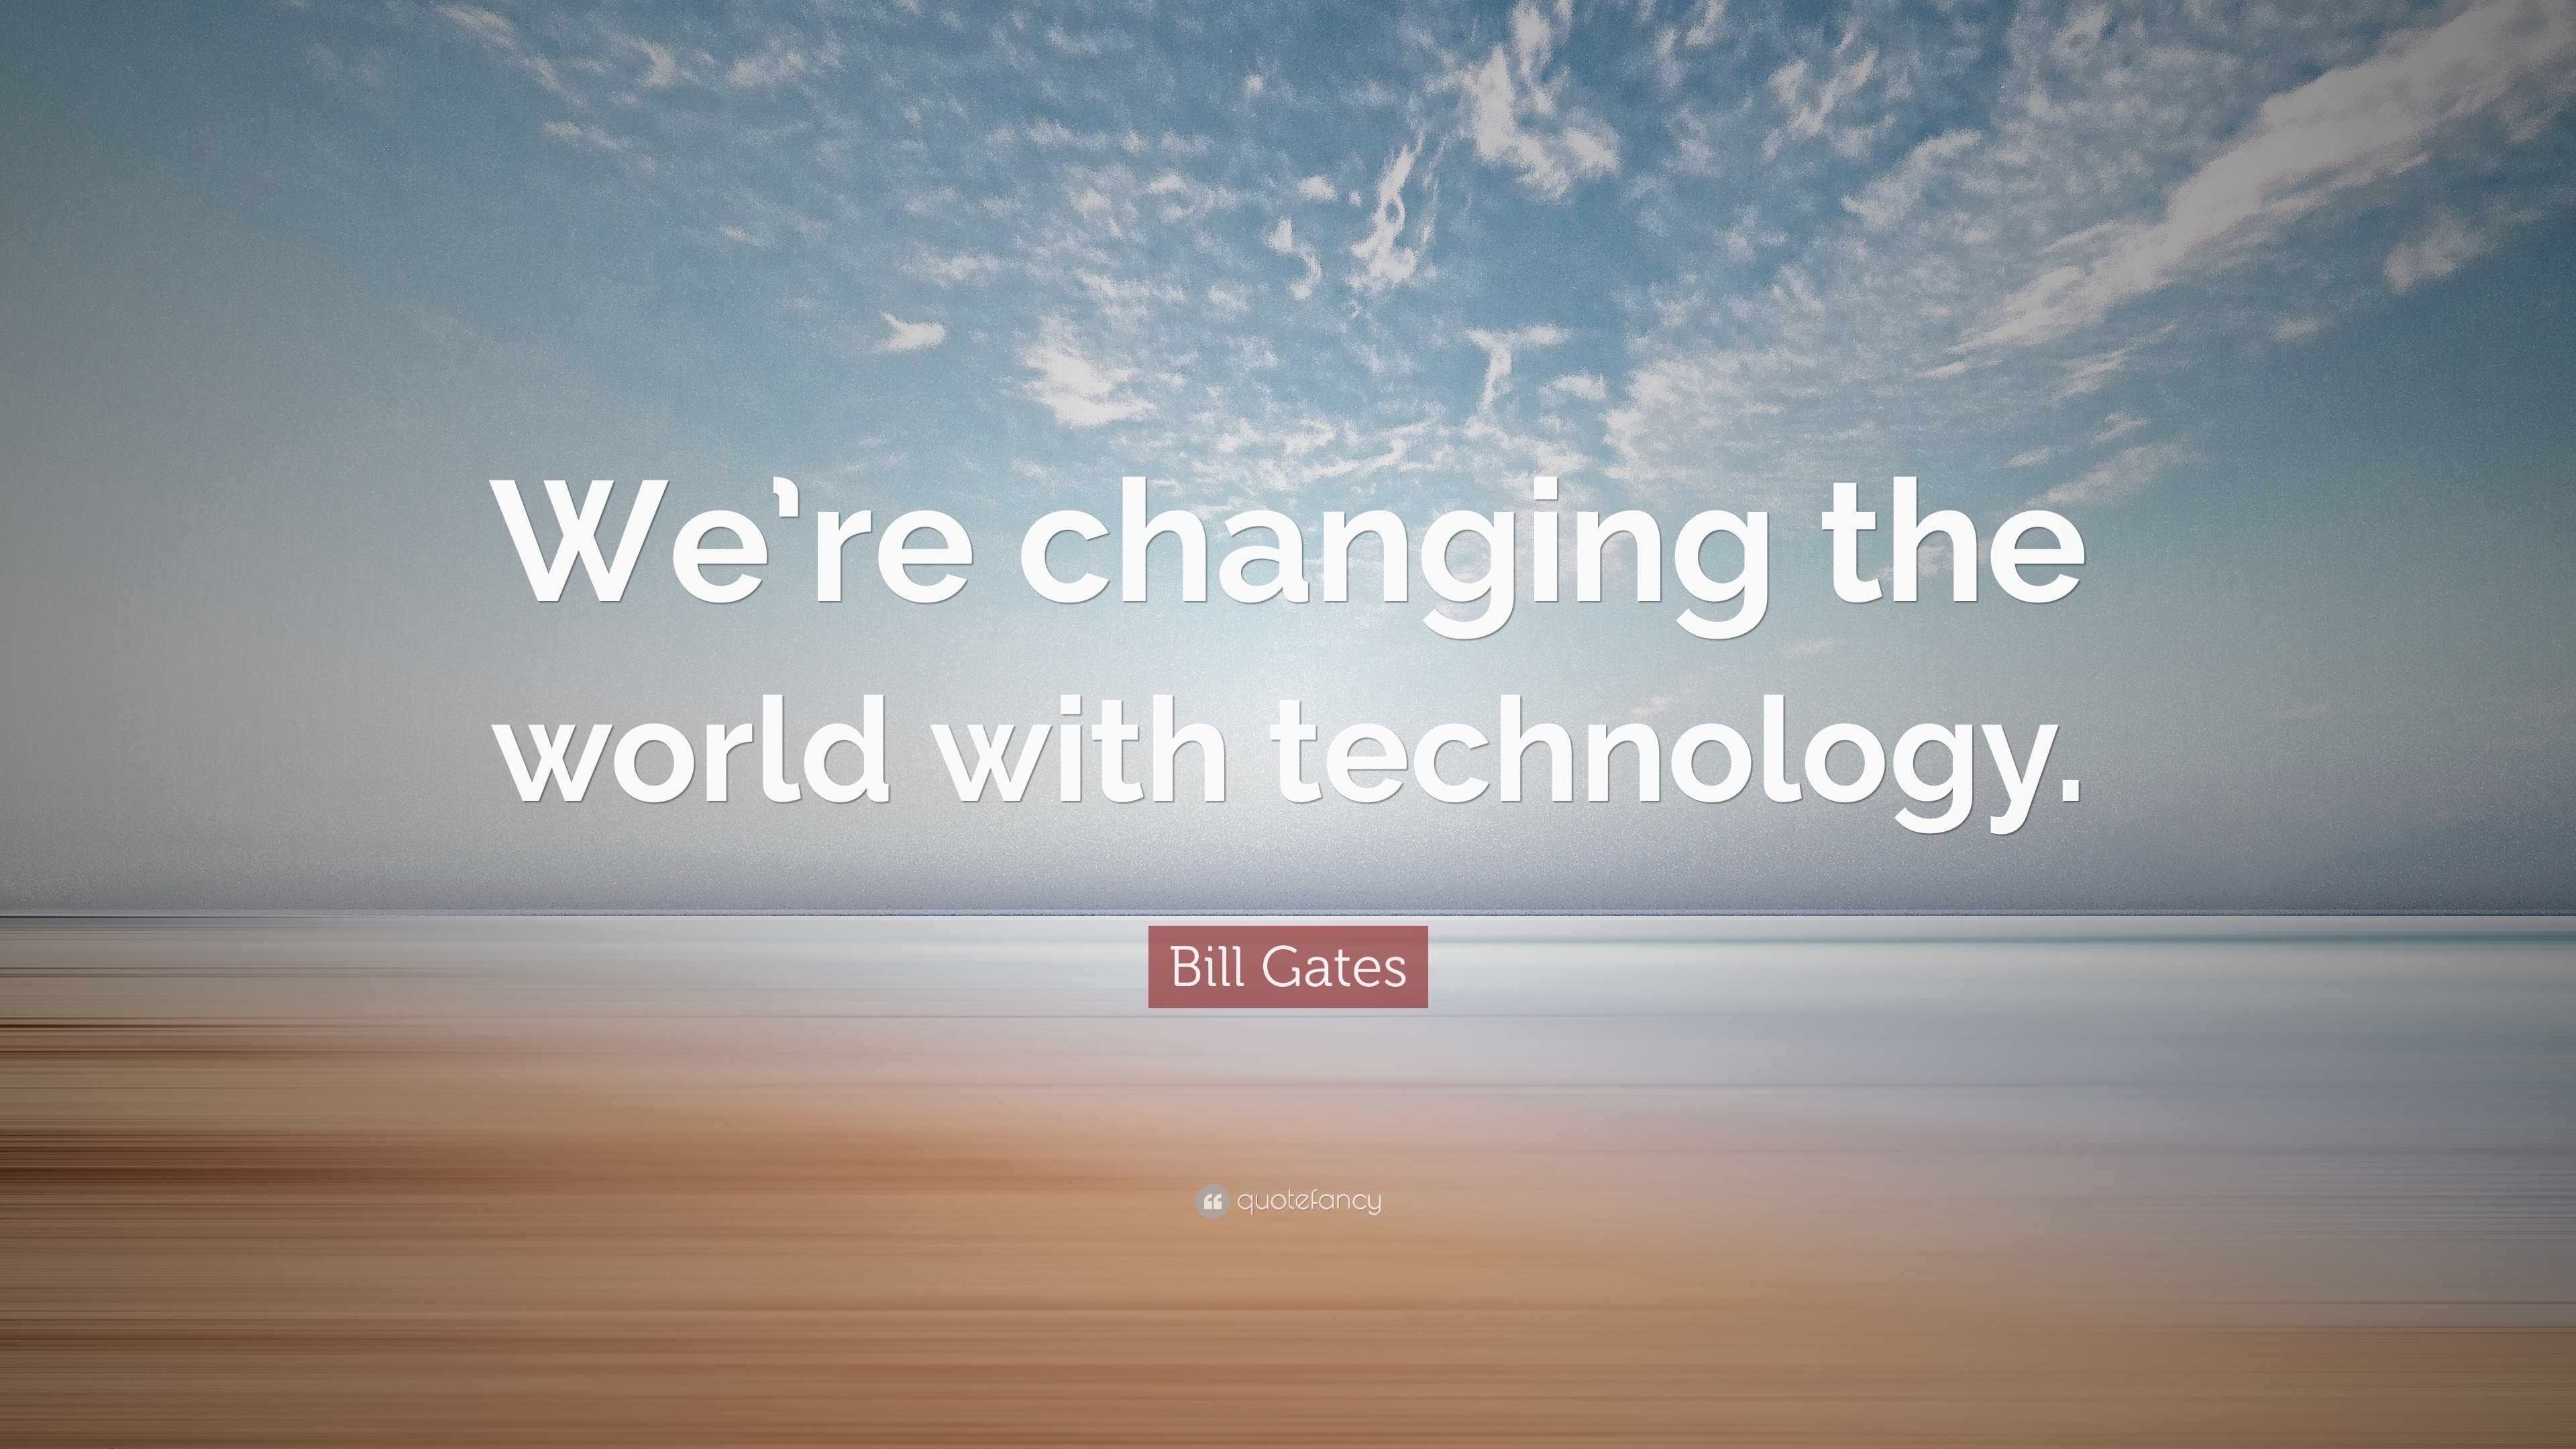 Bill Gates Quote: “We’re changing the world with technology.” (12